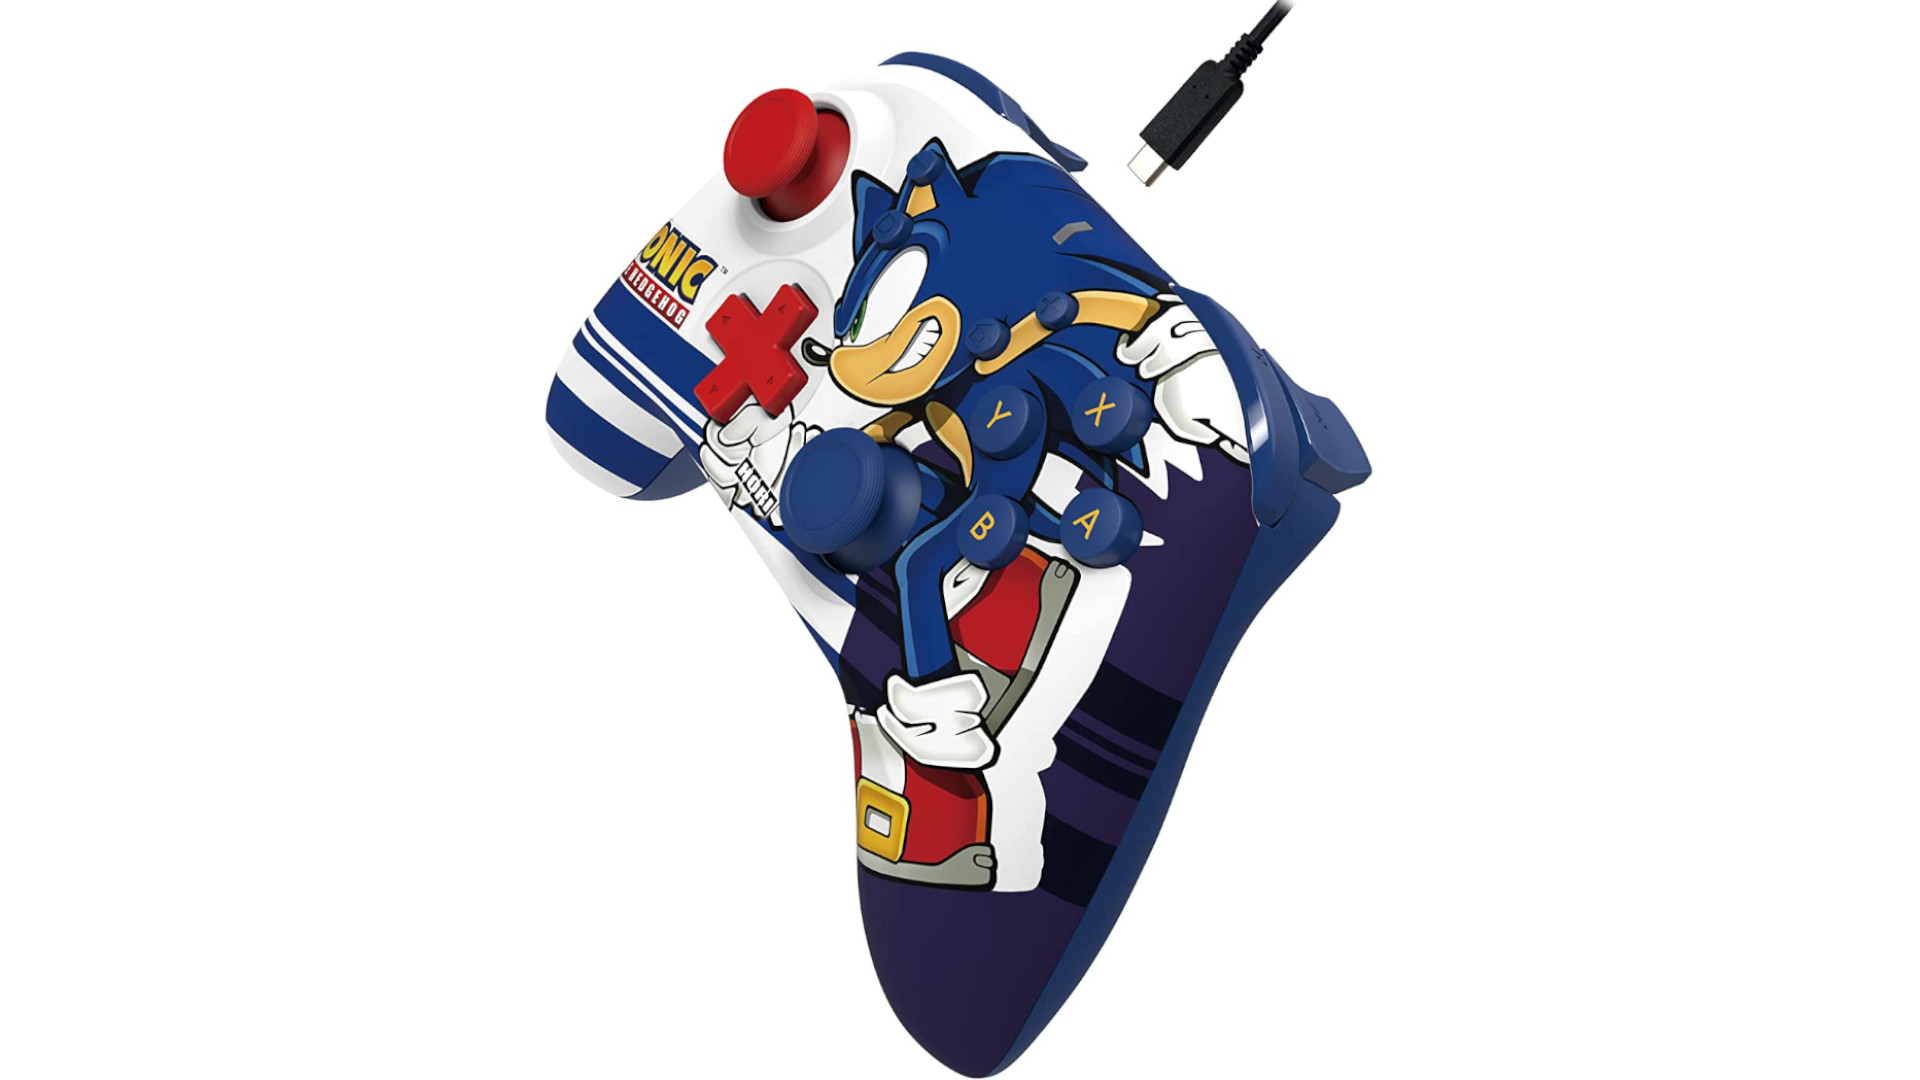 A sideshot of the Sonic Nintendo Switch Pro Controller